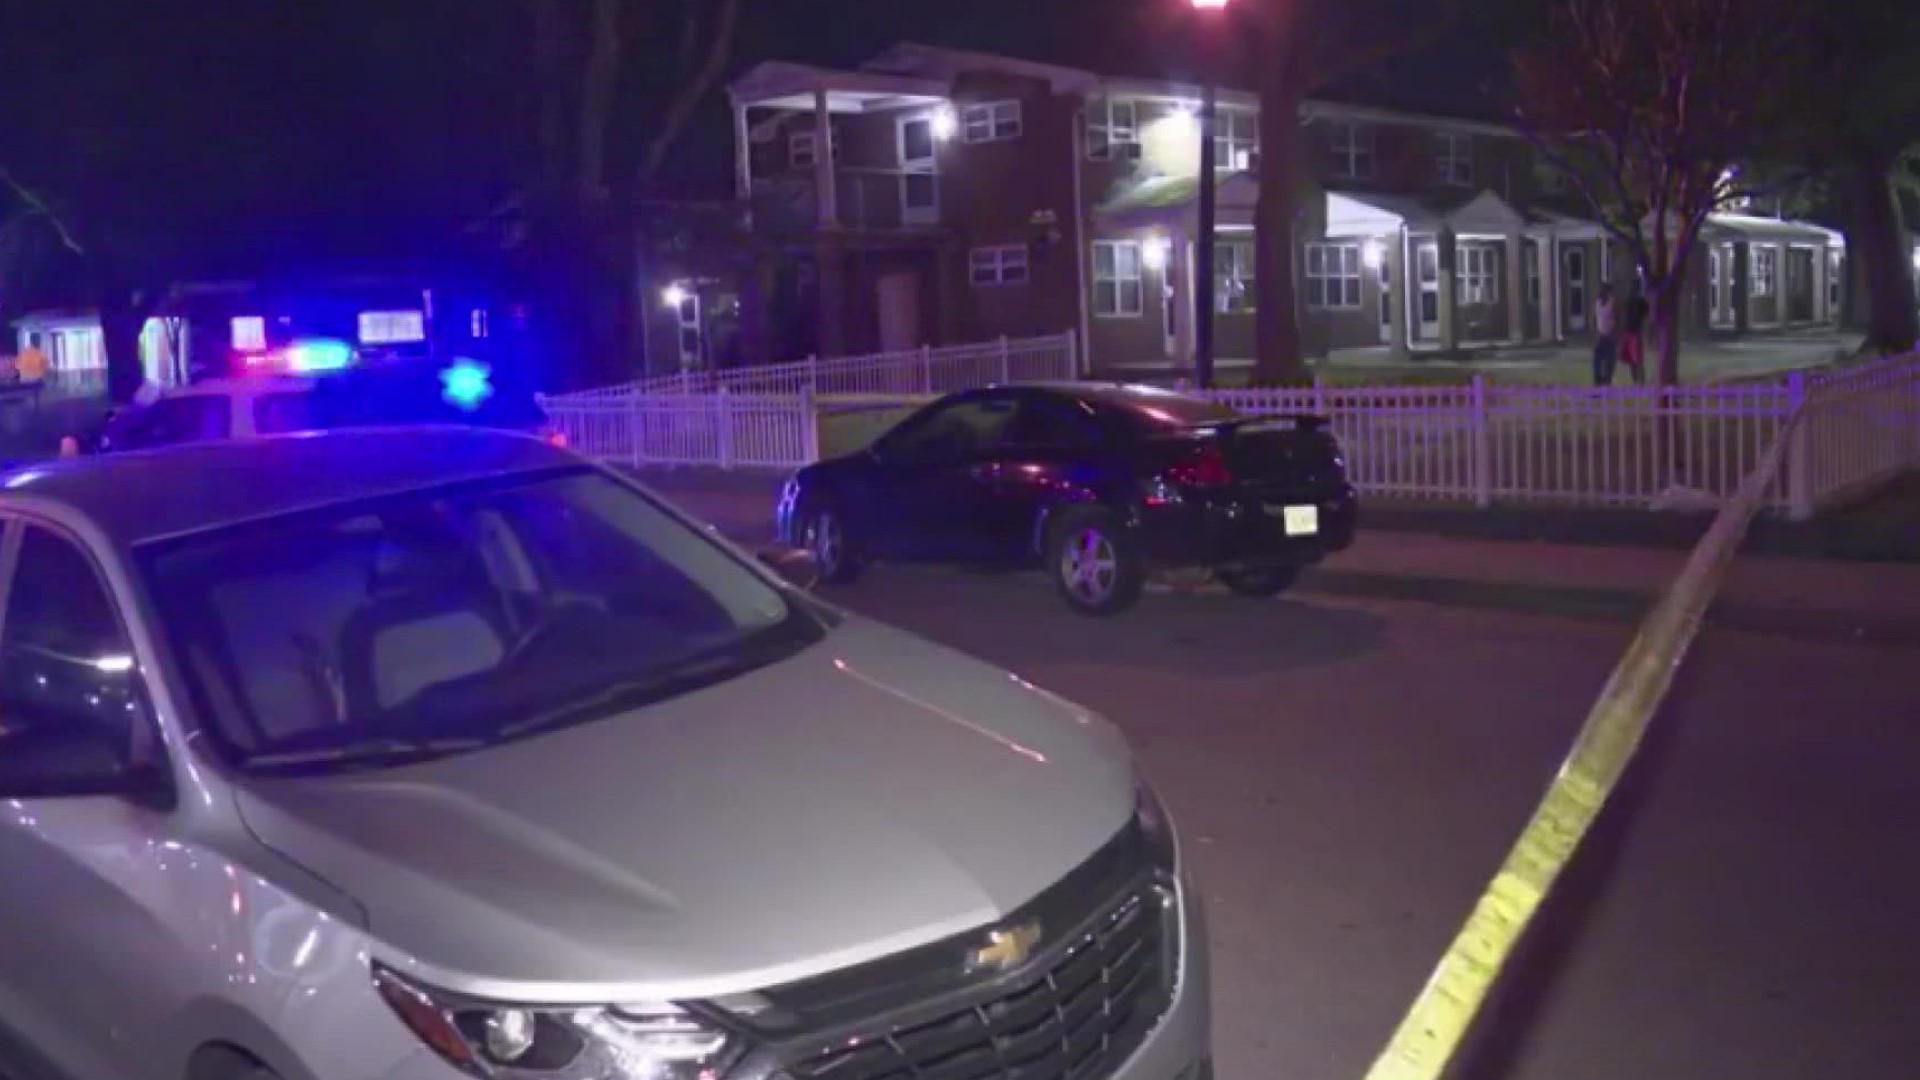 A 17-year-old boy was shot in the leg. Just over an hour later, officers found a 14-year-old who was shot in the leg and a woman who had been grazed by a bullet.